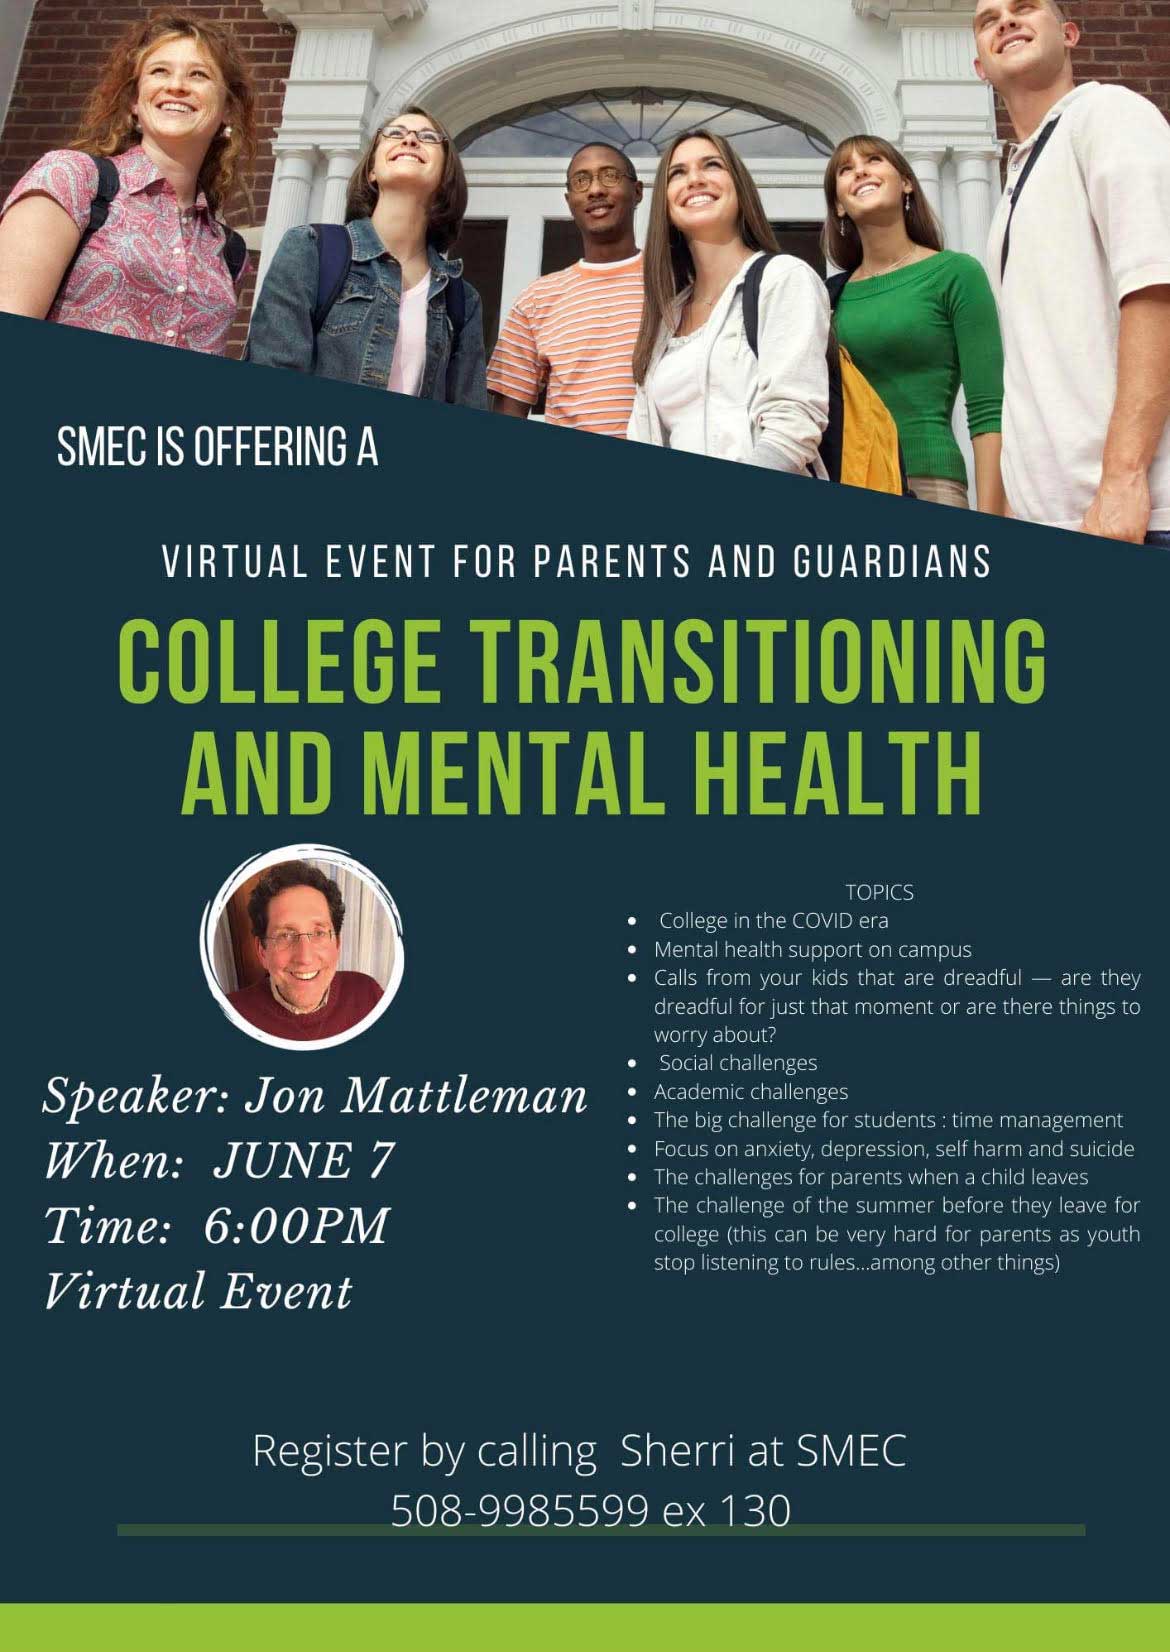 Poster about college transitioning and mental Health